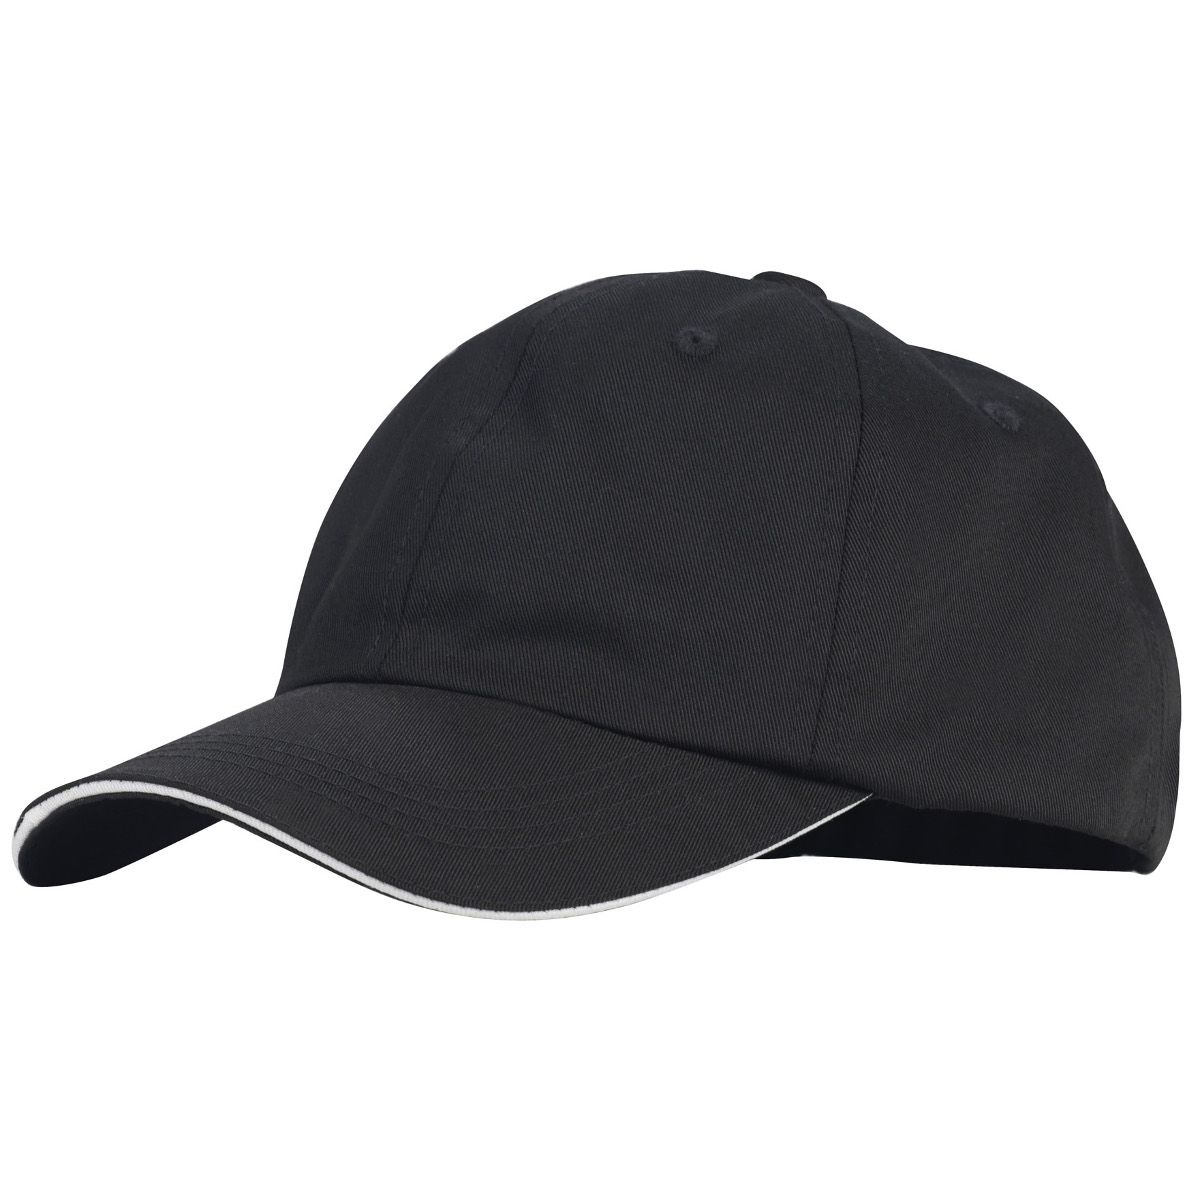 Black Polyester Cotton Chef Hat Adjustable Band Pleated 